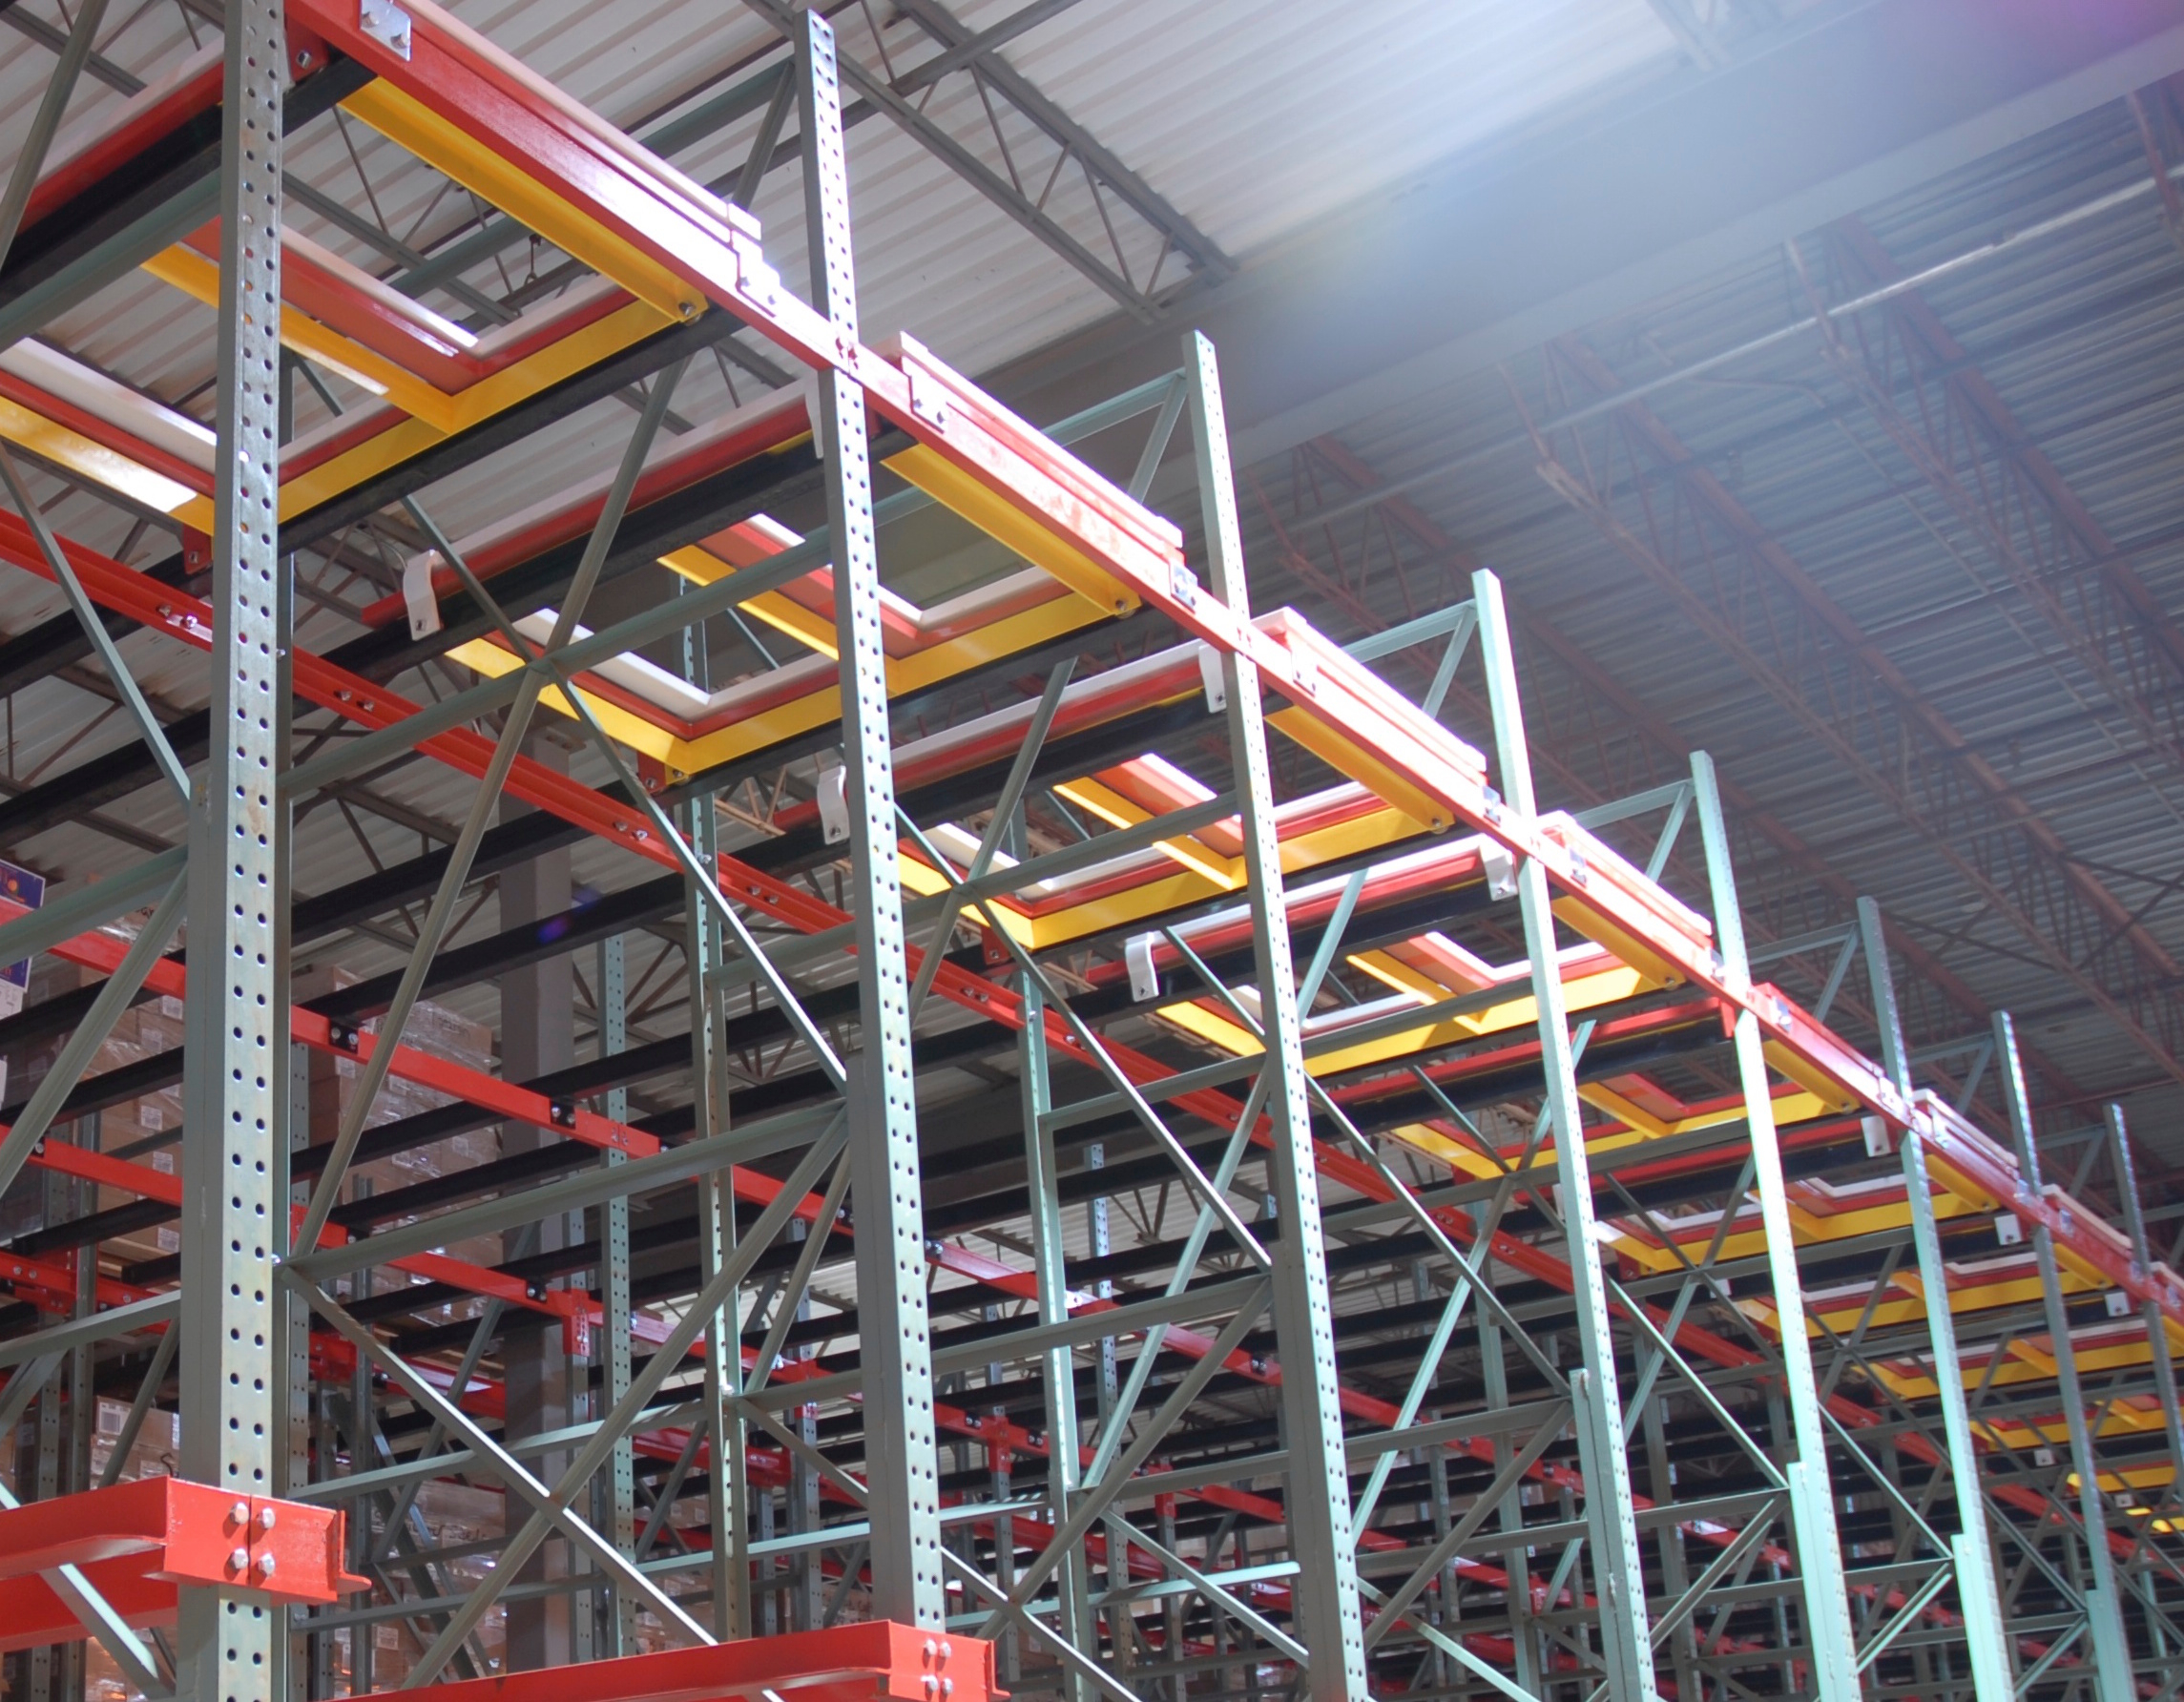 AK Material Handling Systems Photo